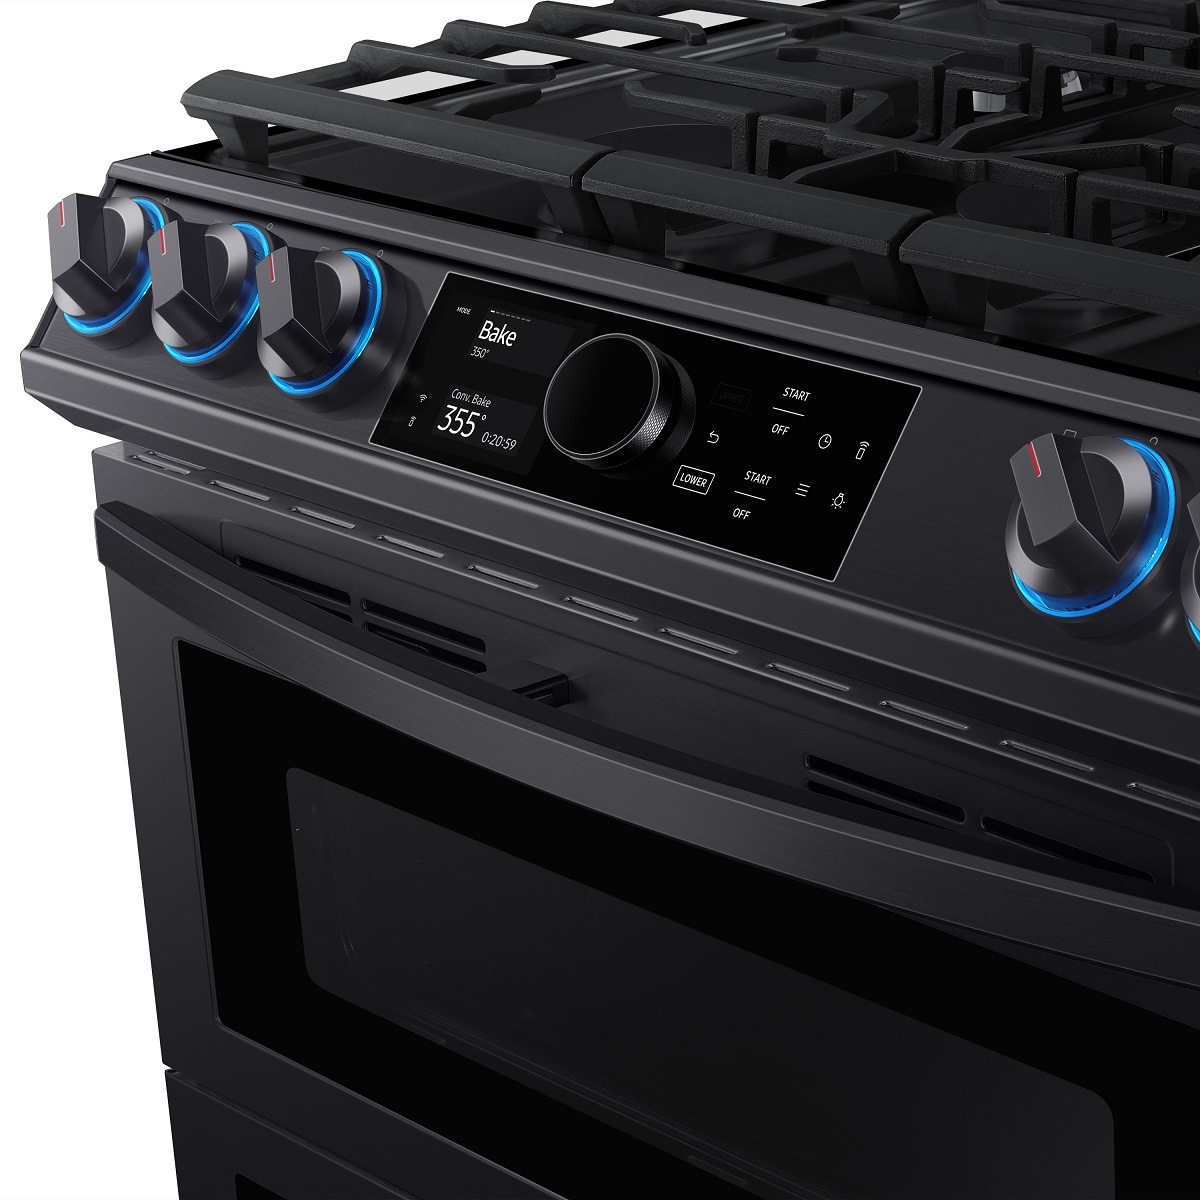 Samsung Double Oven Dual Fuel Ranges at